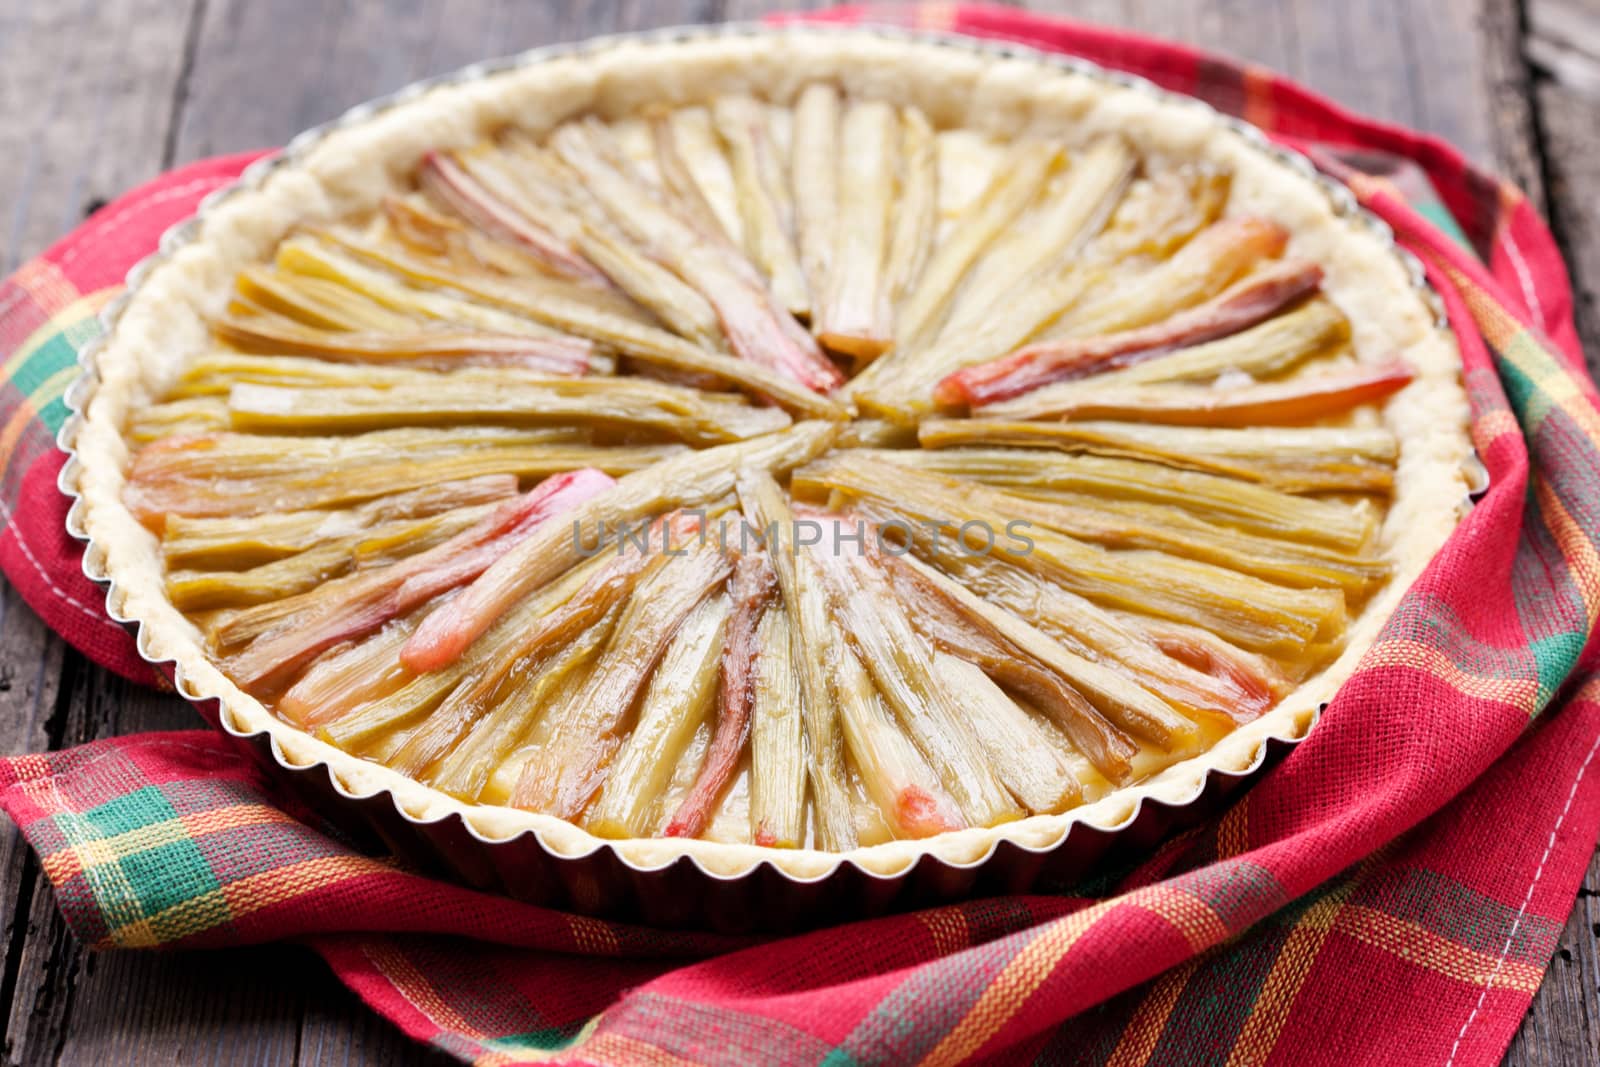 Delicious rhubarb pie on rustic background